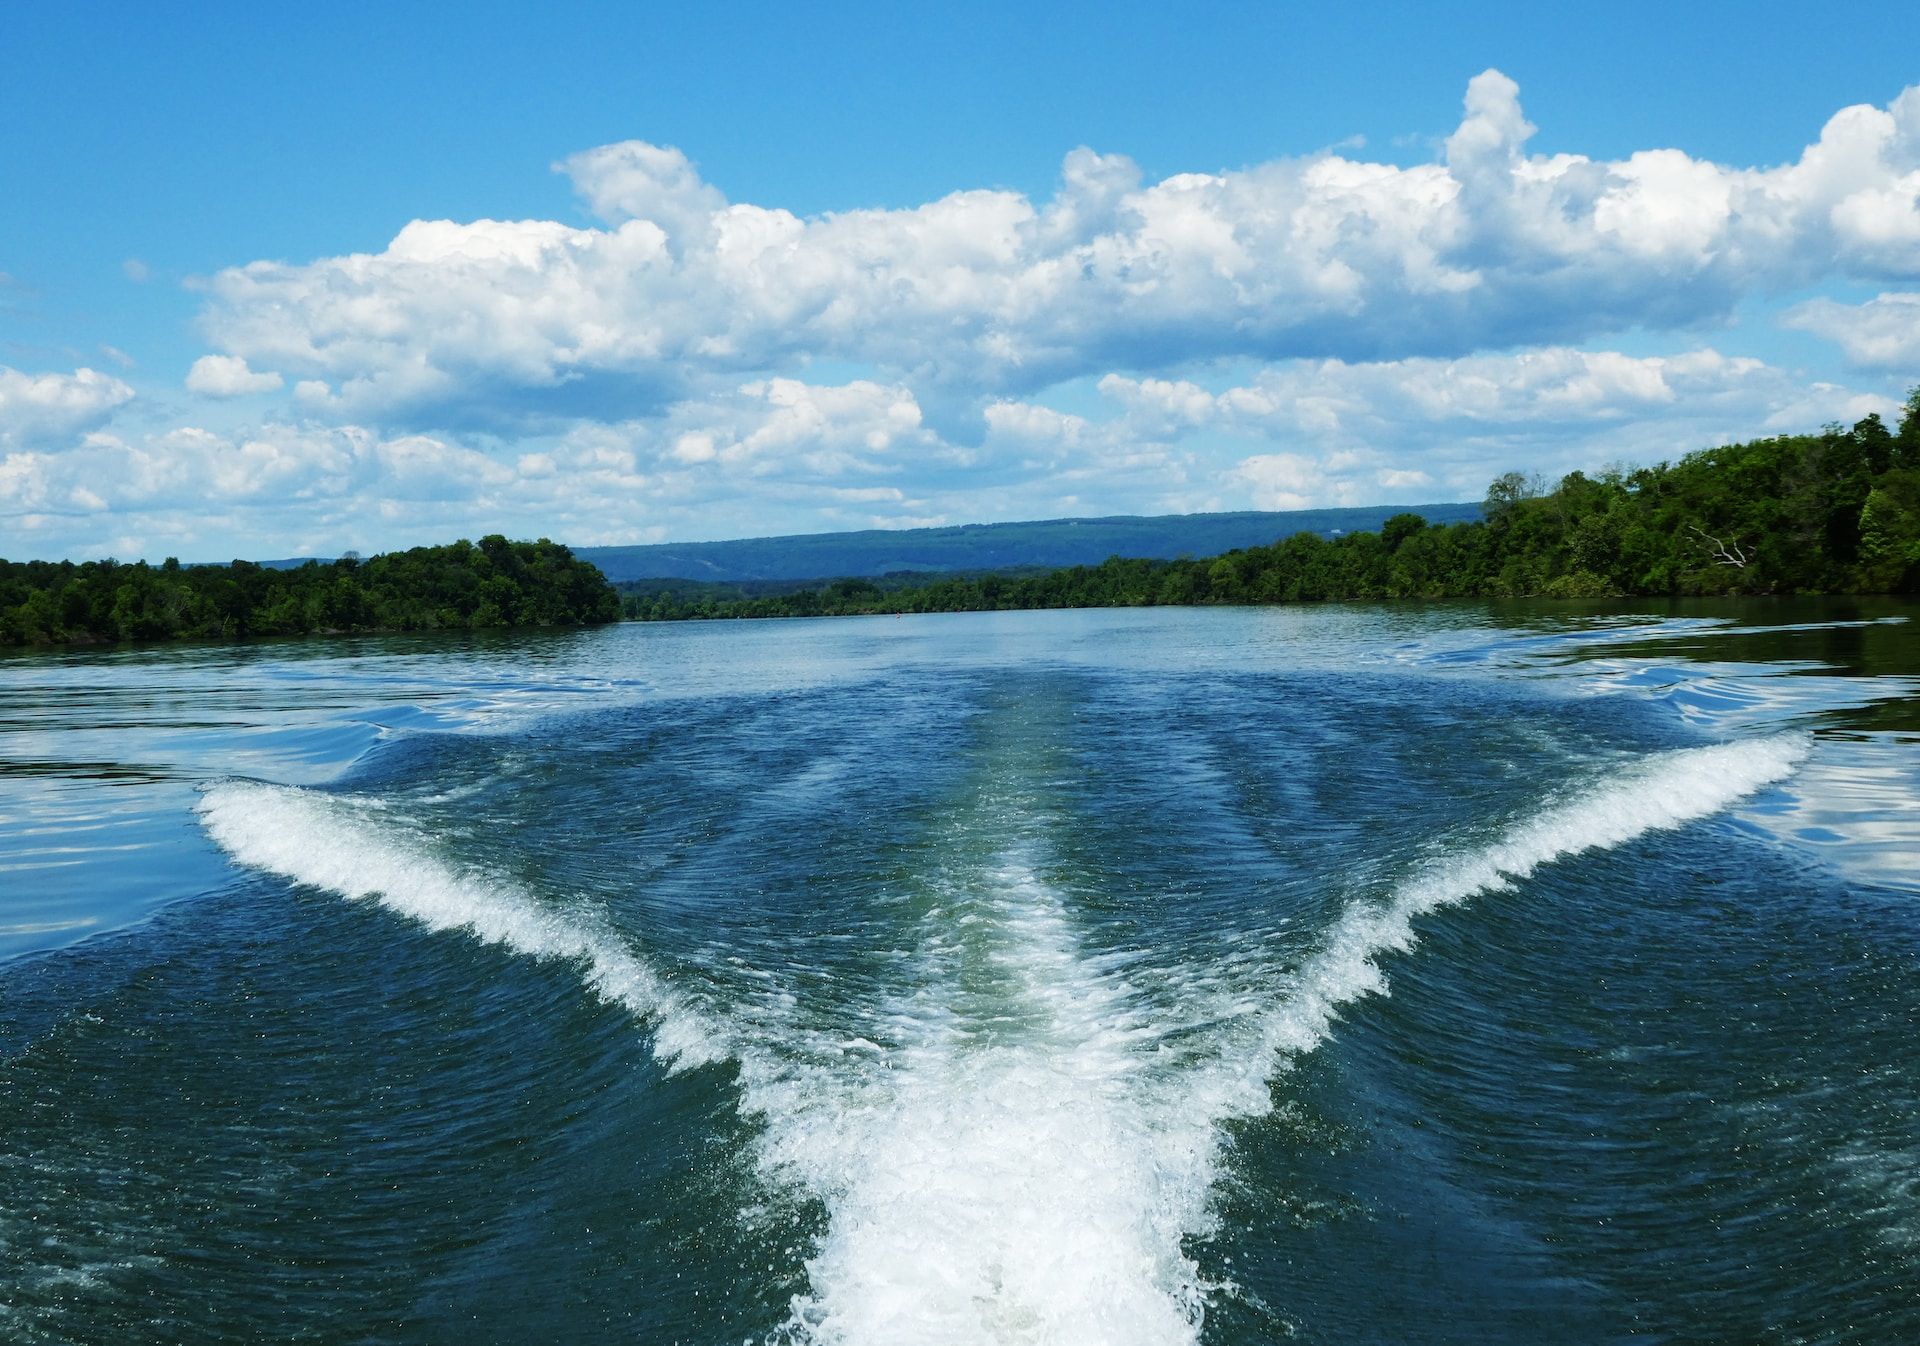 A boat leaving a wake on a large body of water.